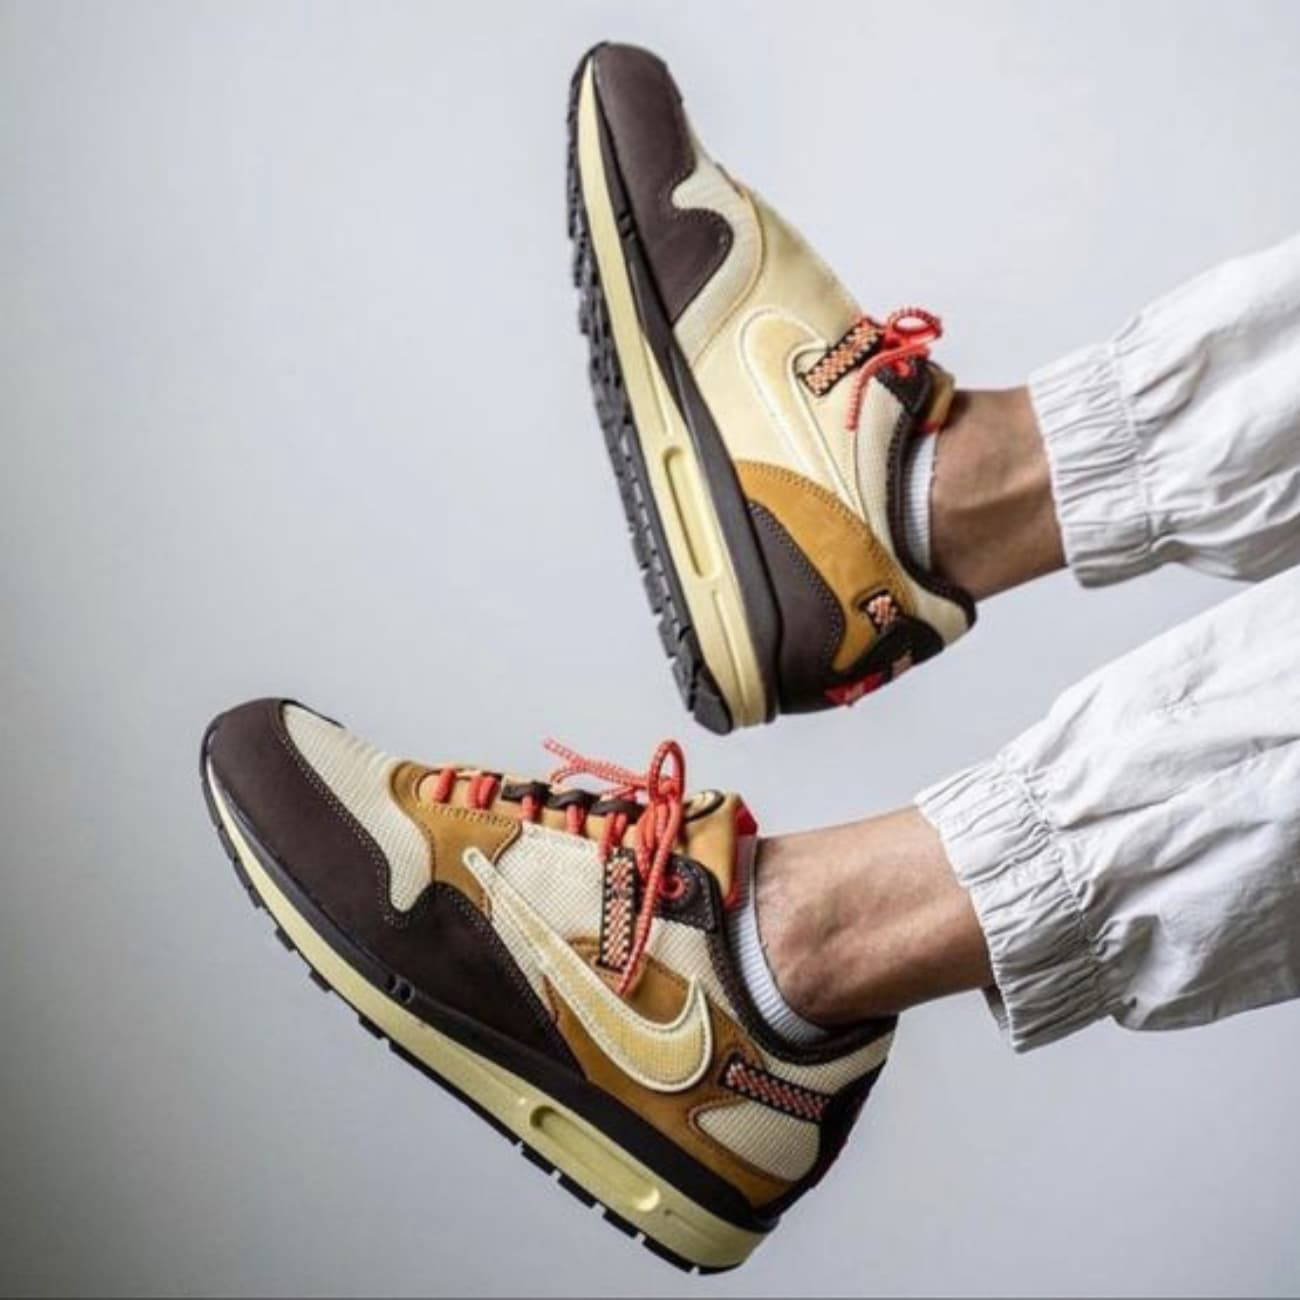 Stüssy x Nike: A History of Iconic Sneaker Collaborations